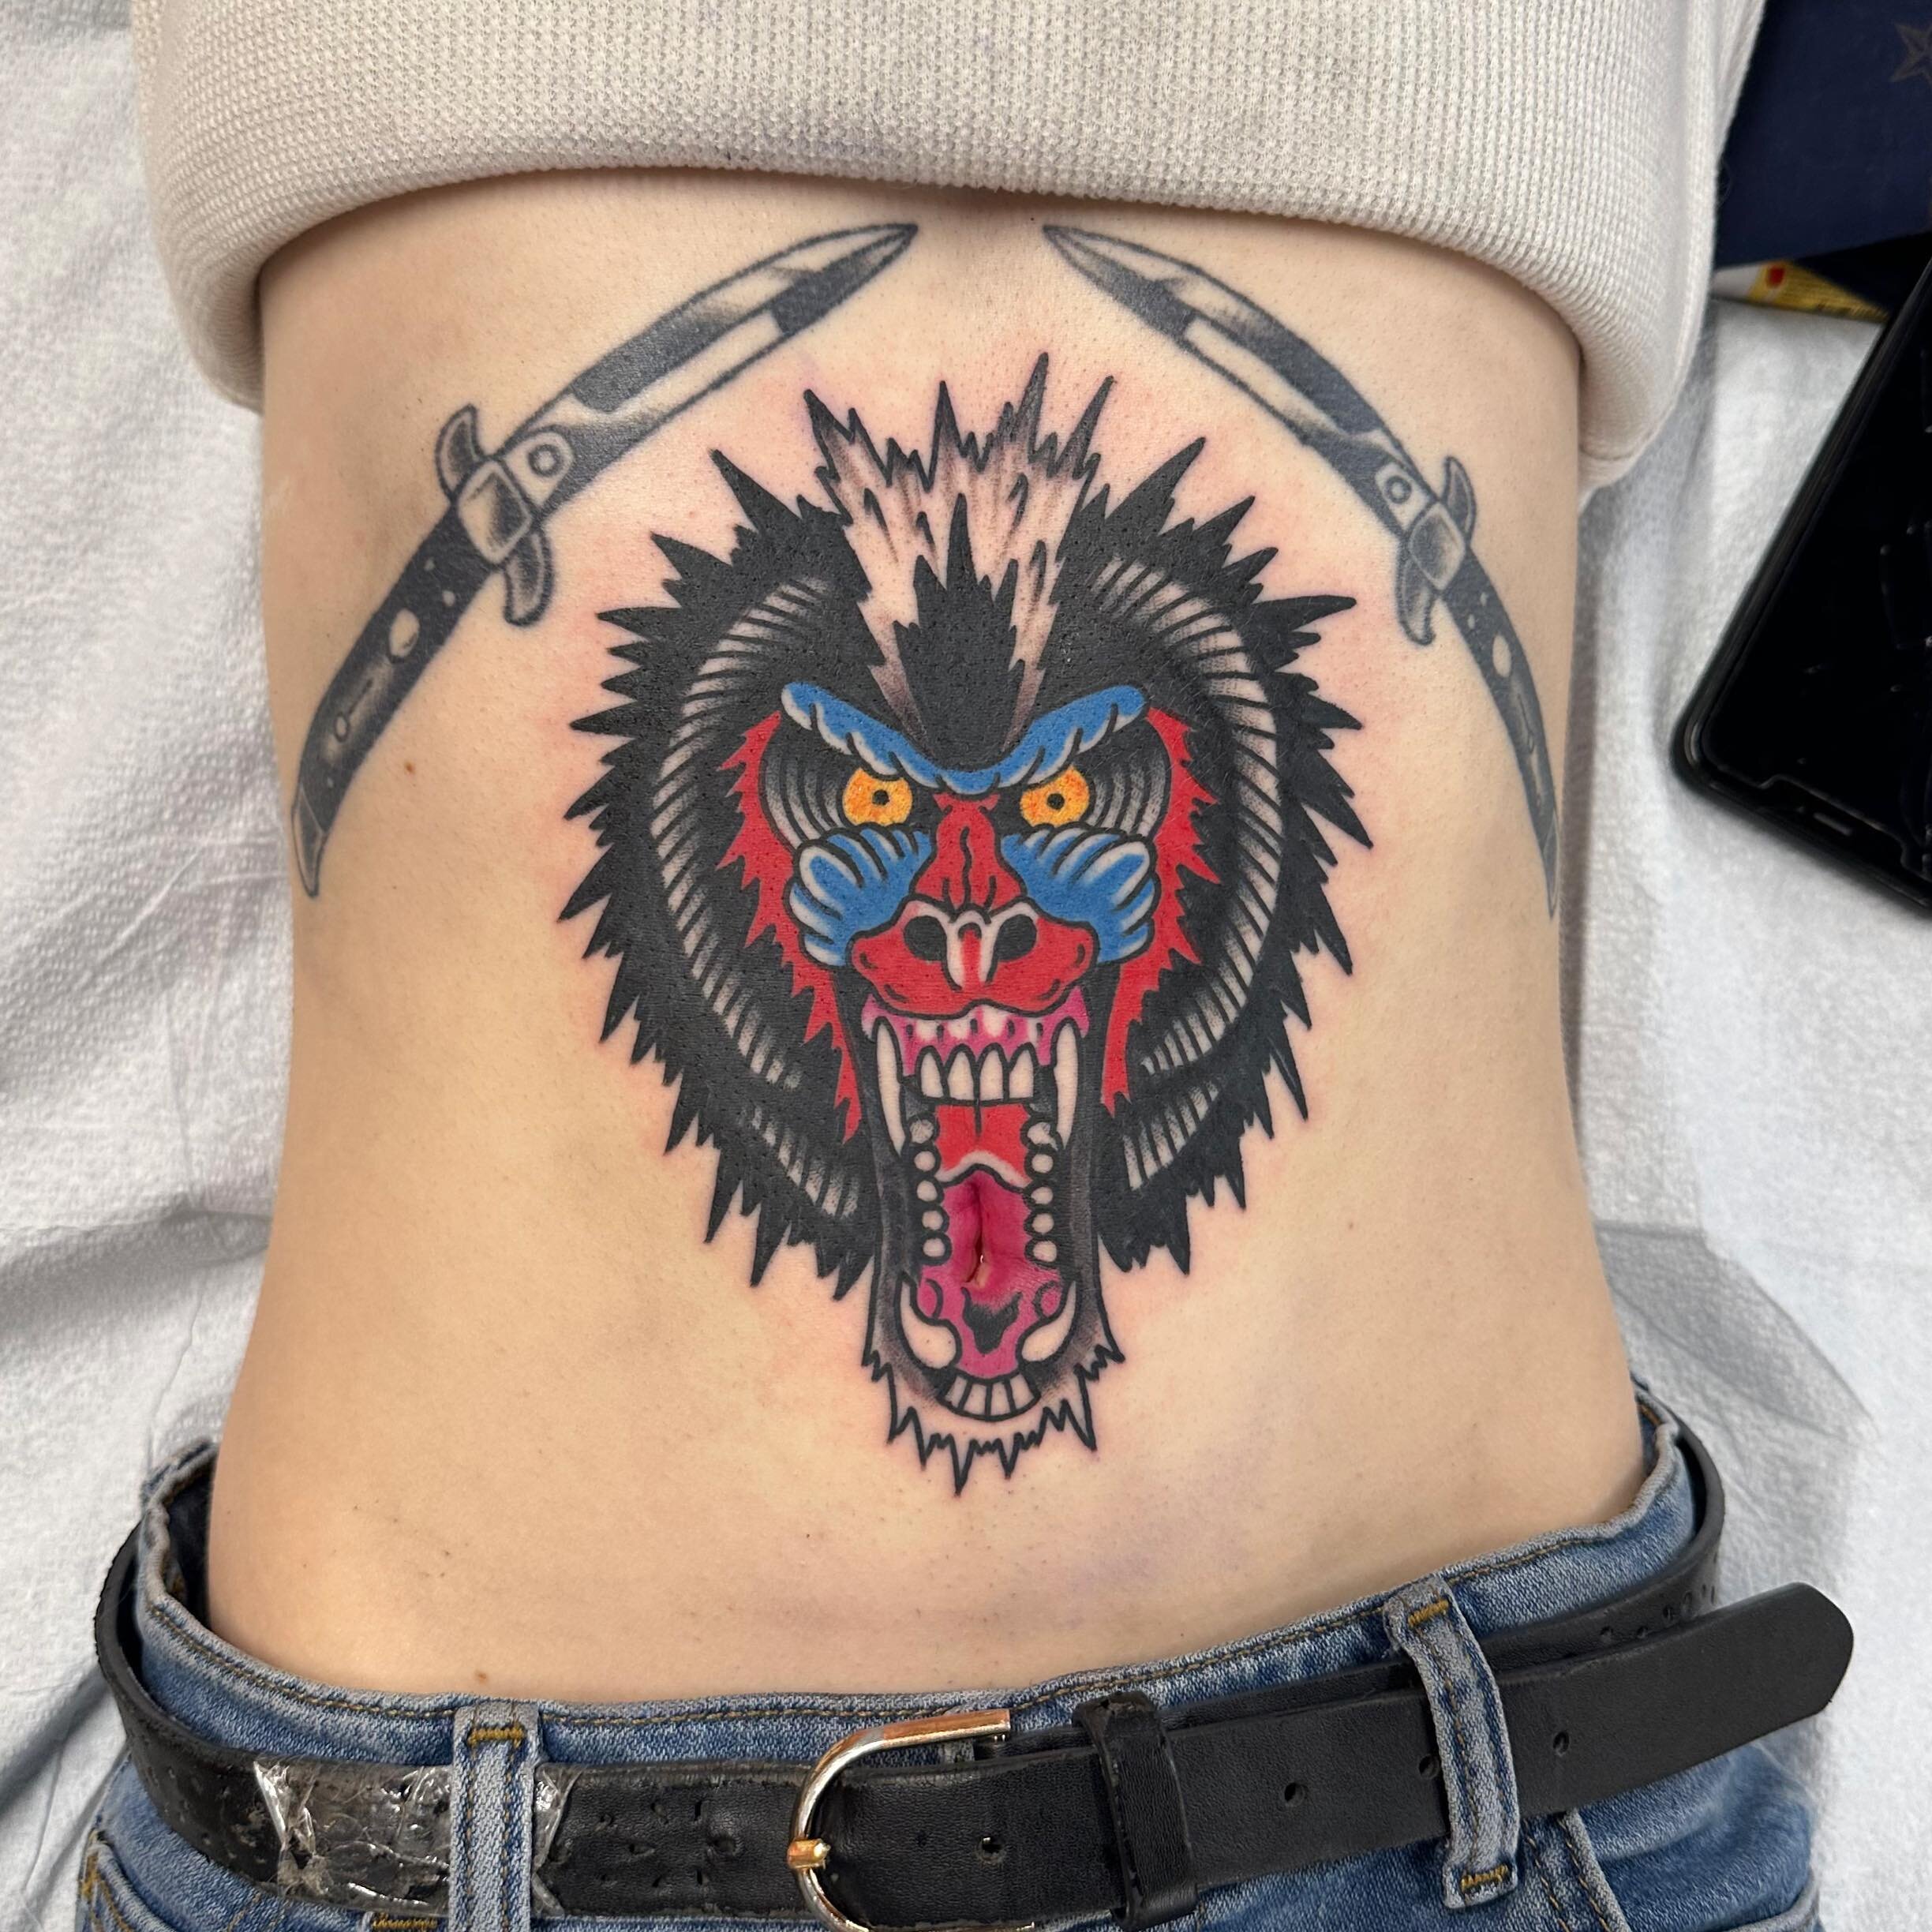 Screaming baboon by @marshall.gif 
Walk ins tomorrow starting at 12! Get here a little early if you&rsquo;re really jonesing for a tattoo this weekend. 
@historiccommercialstreet @historiccstreet